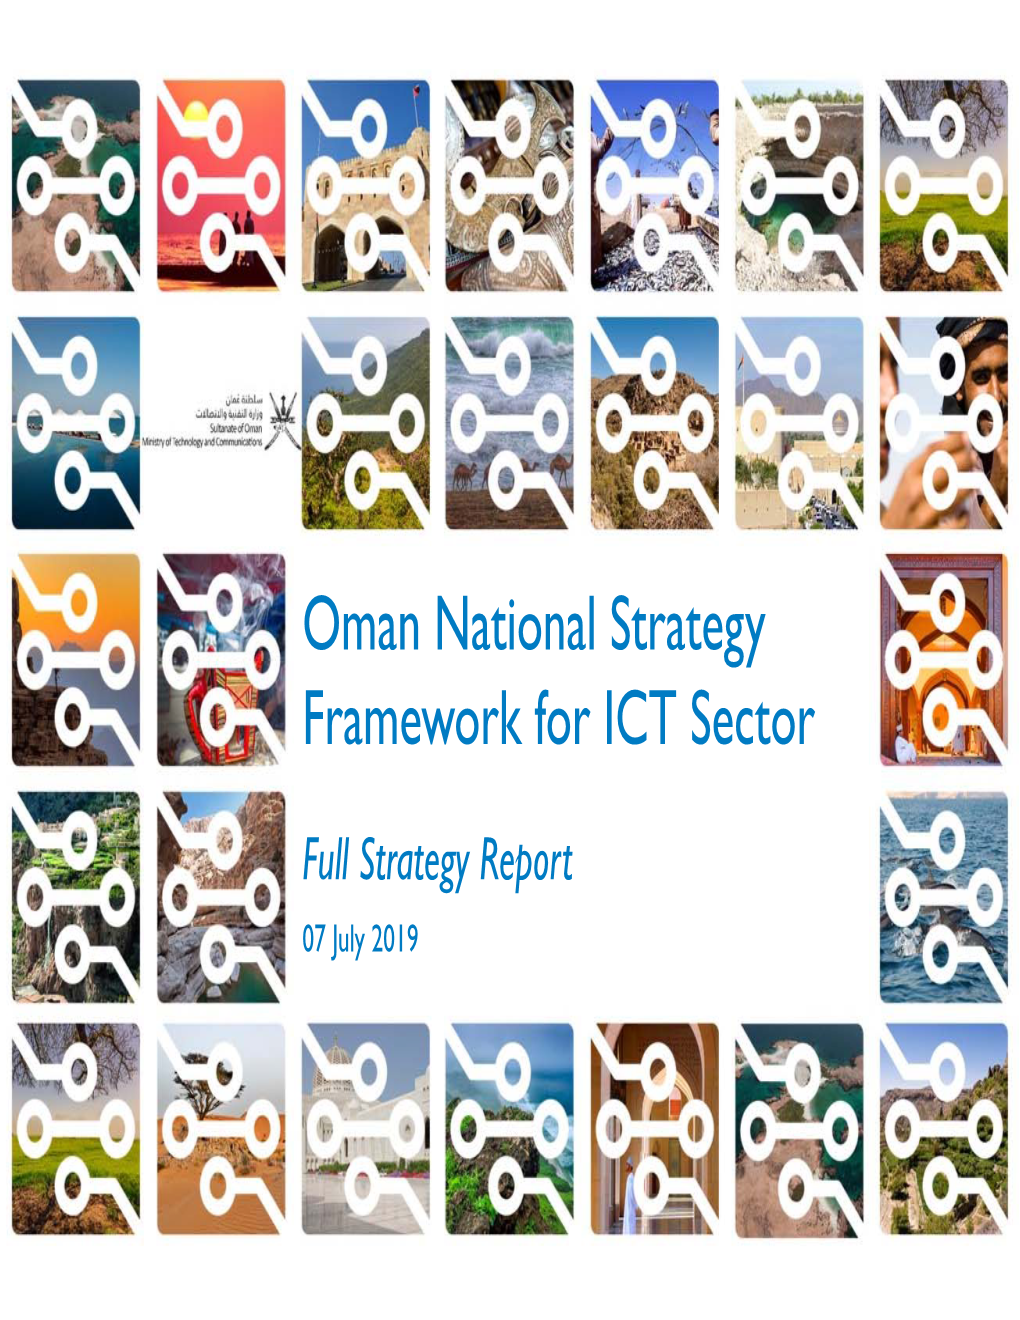 Oman National Strategy Framework for ICT Sector